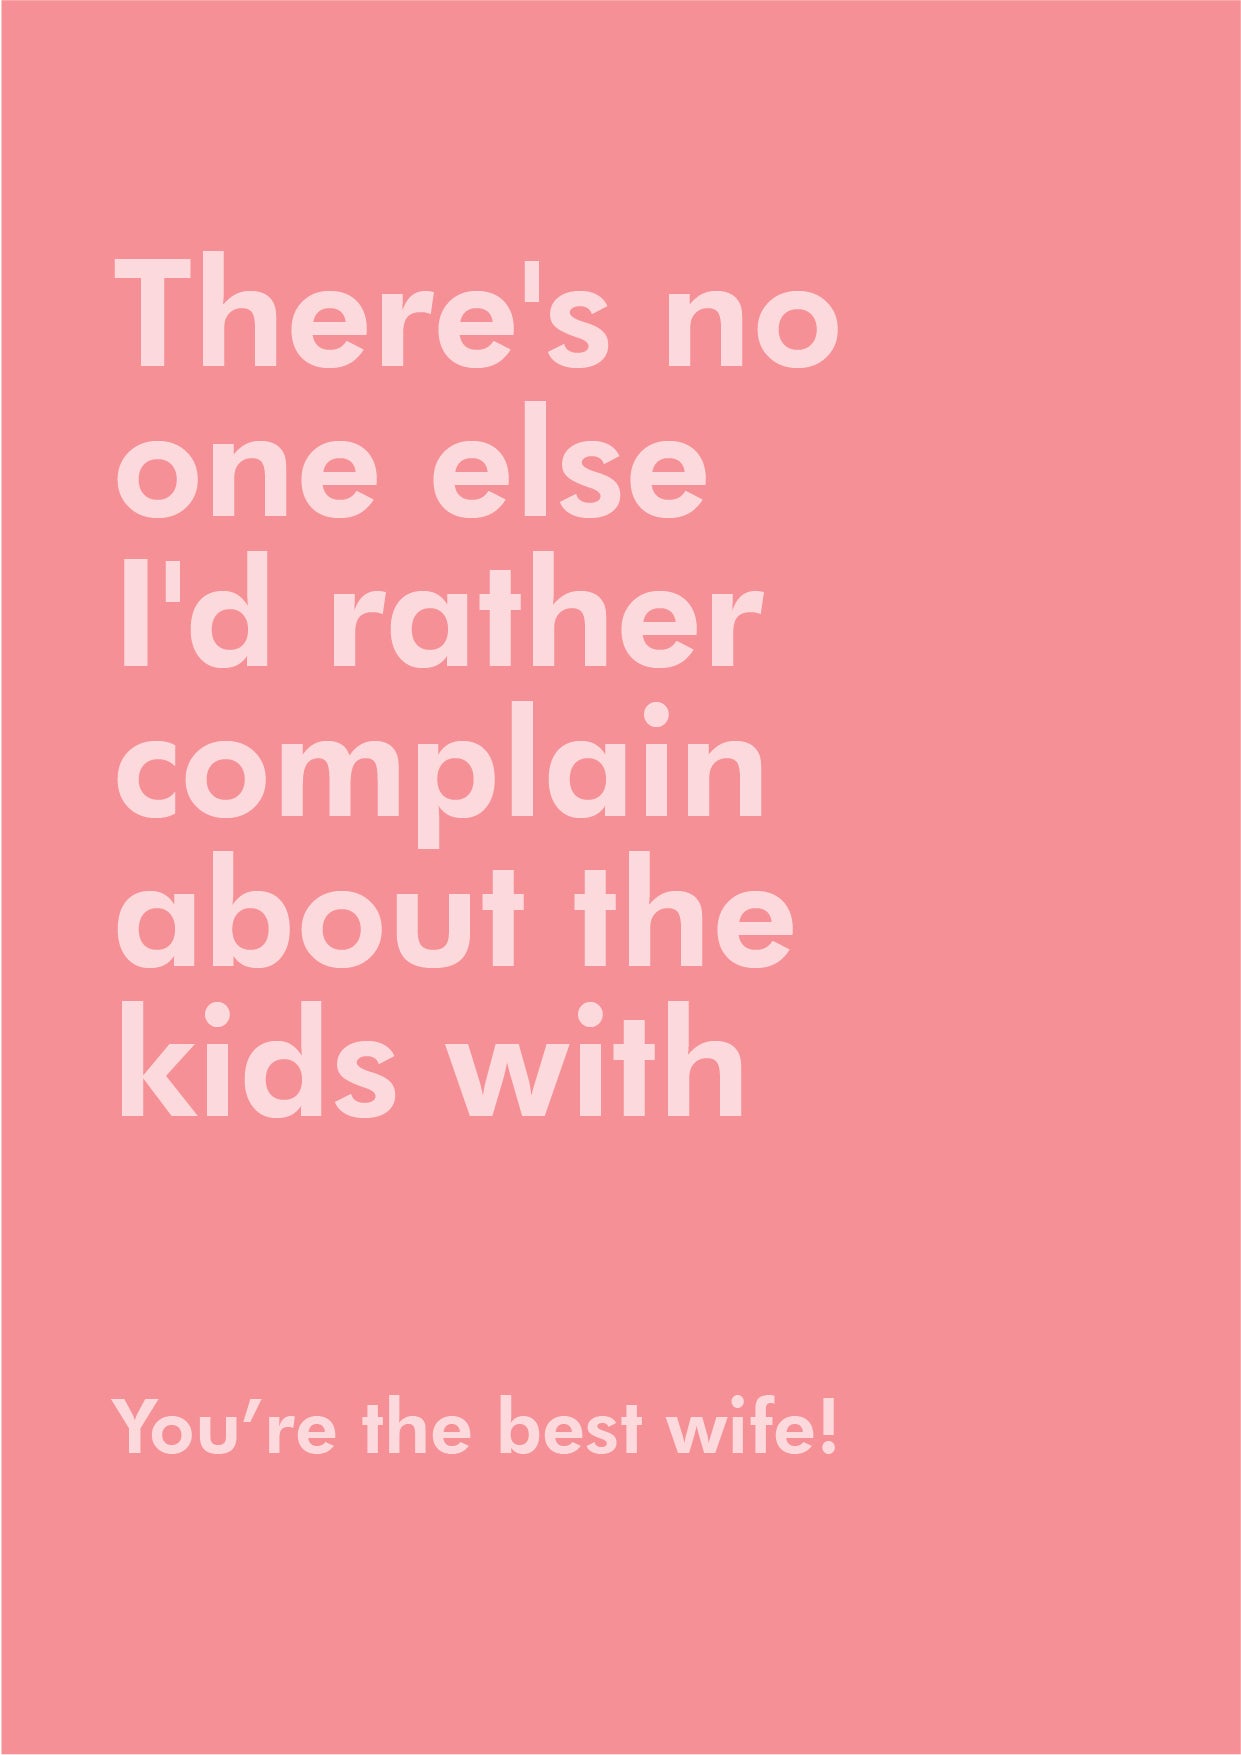 There's No One Else I'd Rather Complain About The Kids With- You're The Best Wife.